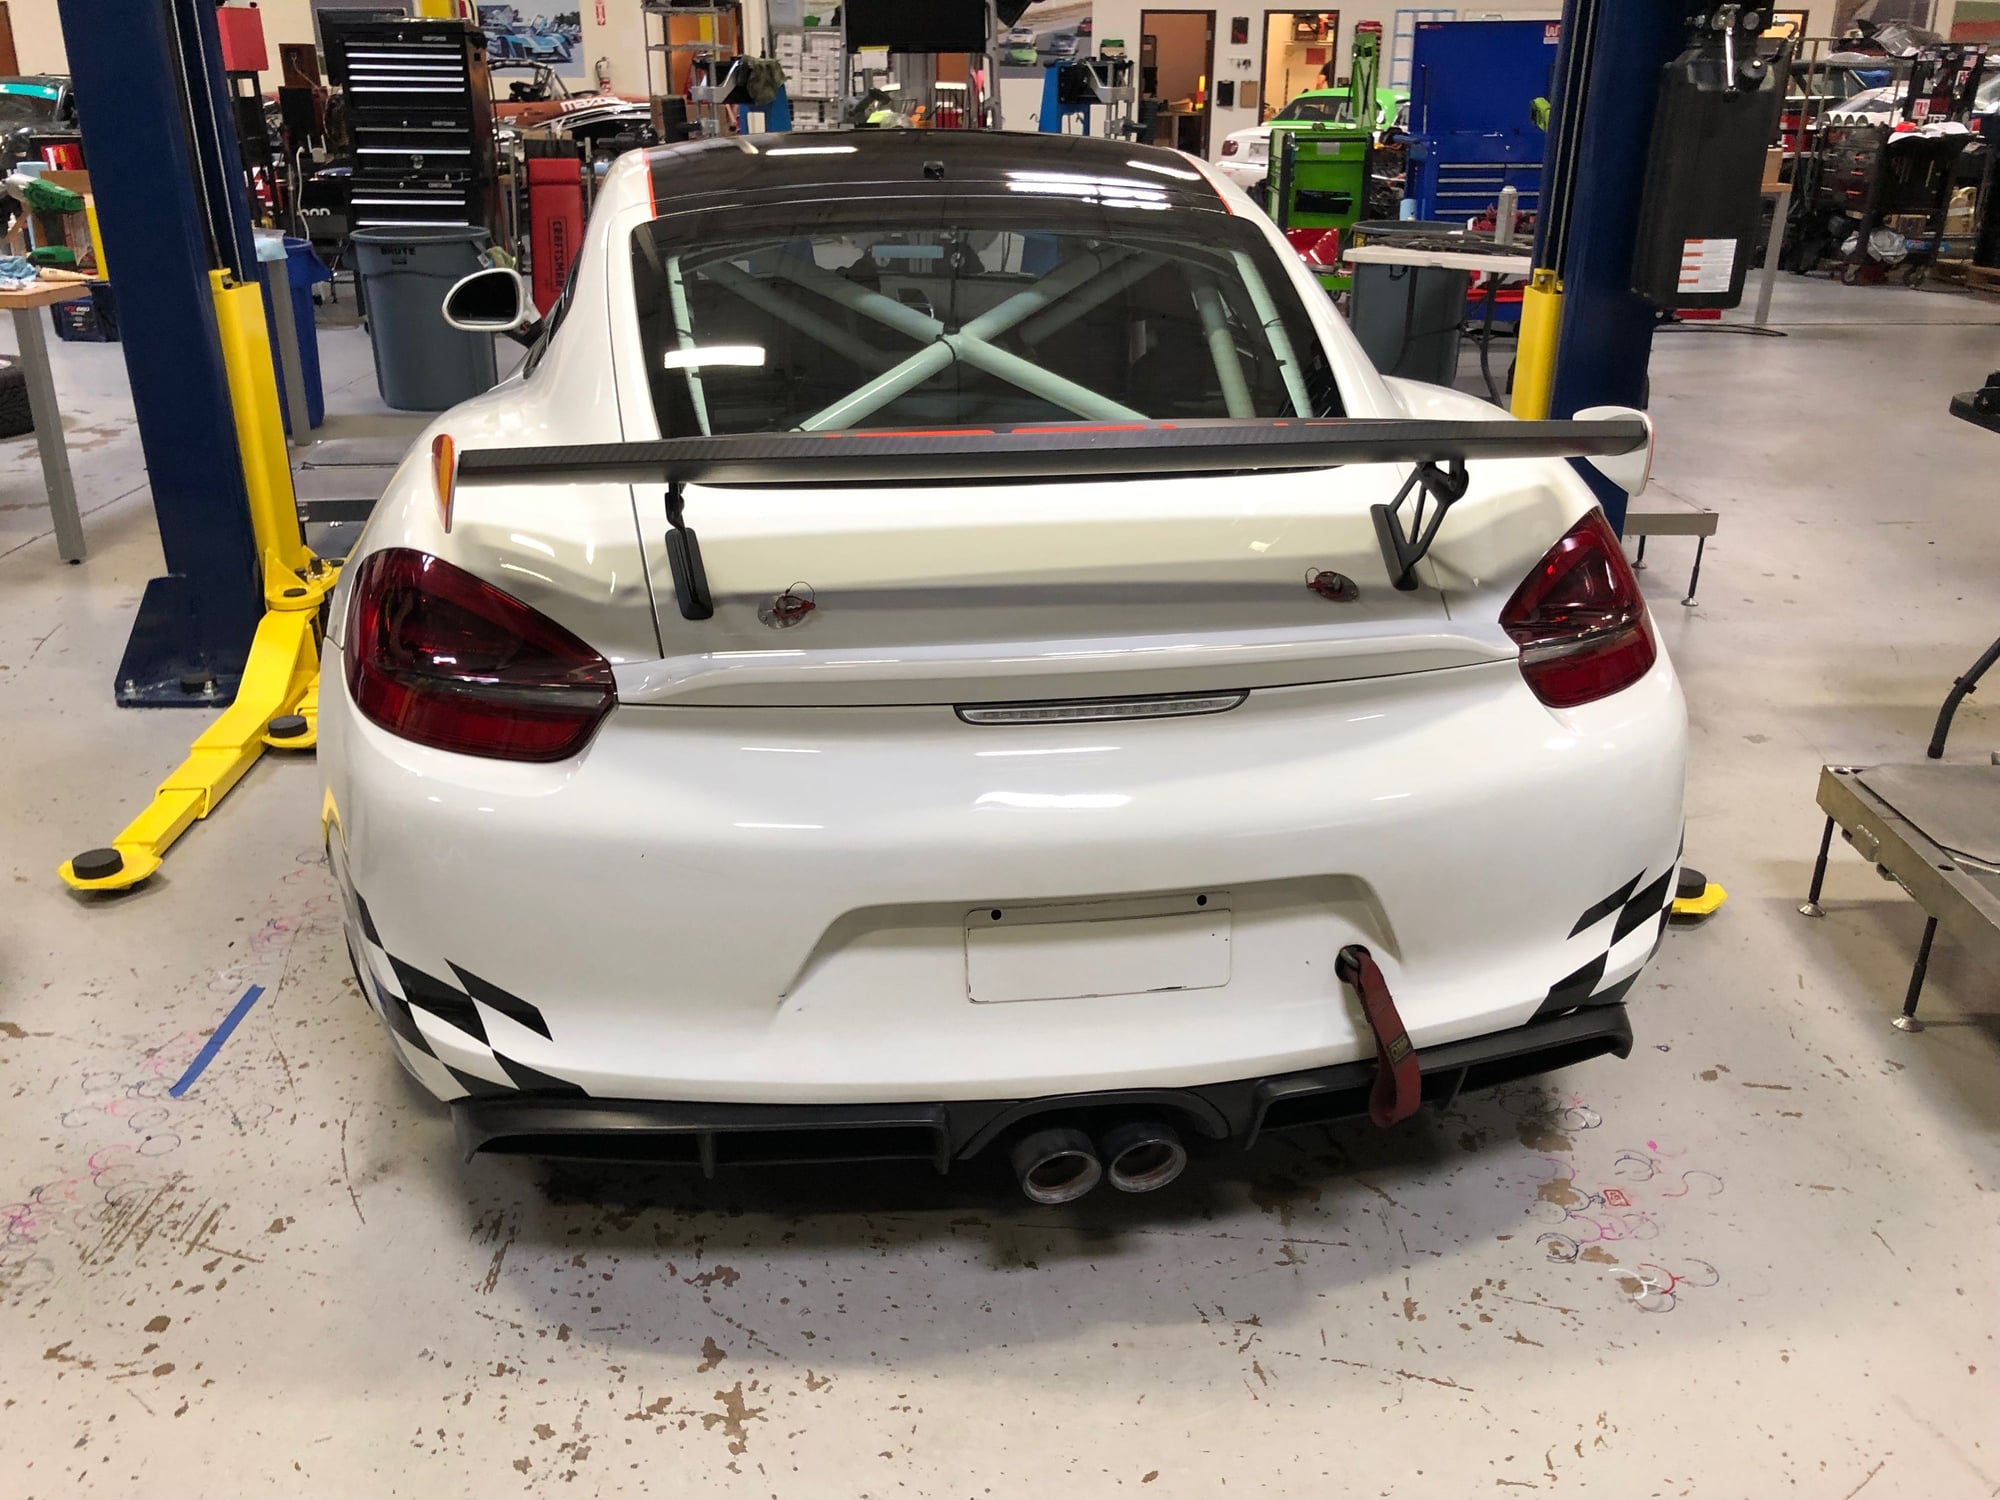 2016 Porsche Cayman GT4 - 2016 Porsche Clubsport GT4 with 100 liter fuel tank! - Used - VIN WP0777987GK19731 - 6 cyl - 2WD - Automatic - Coupe - White - Austin, TX 78758, United States